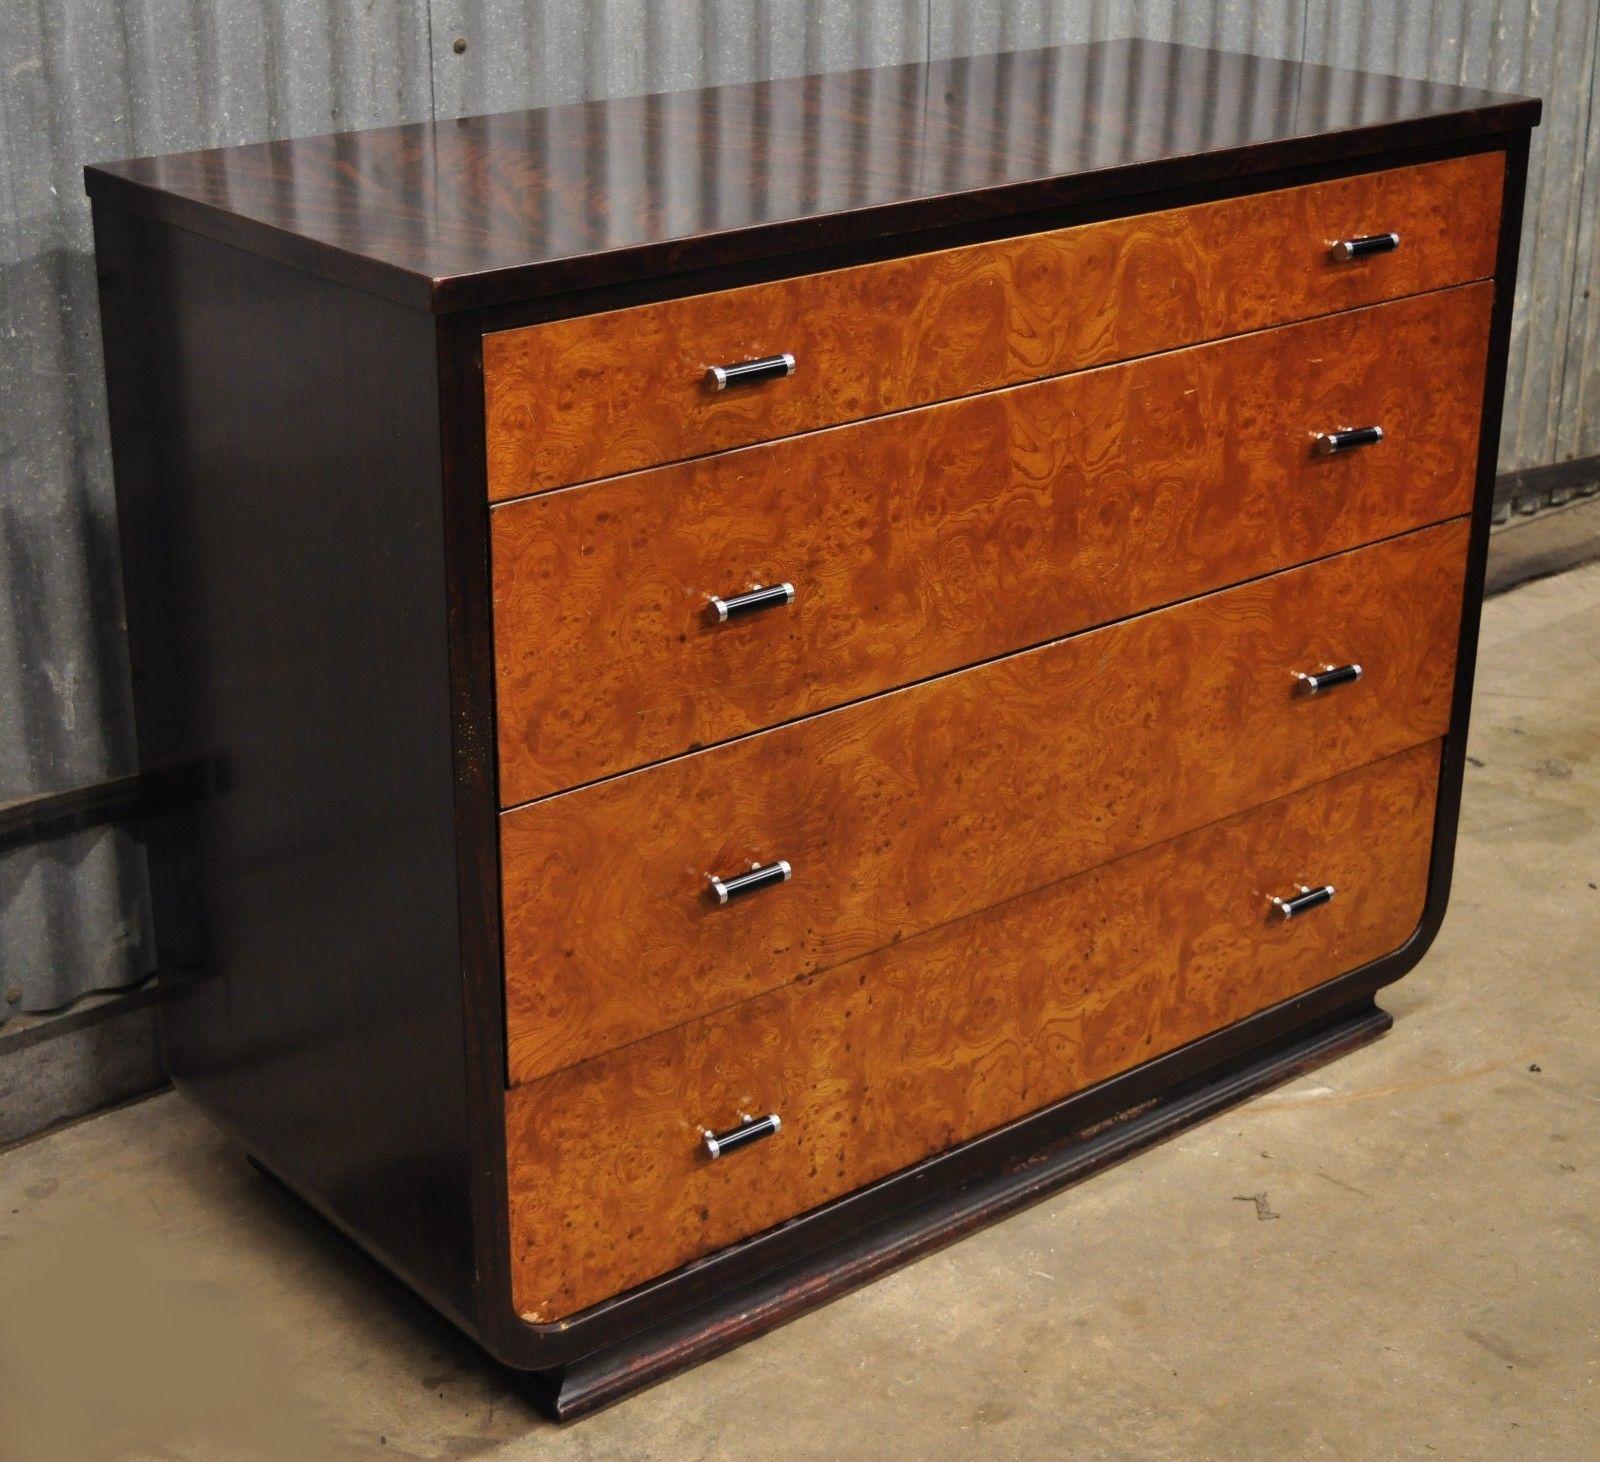 Steel metal Art Deco mahogany painted dresser by Norman Bel Geddes for Simmons. Item features all steel metal construction, wood grain painted finish, in crotch mahogany and burl wood, iconic Art Deco design, metal drawer pulls, original label, and